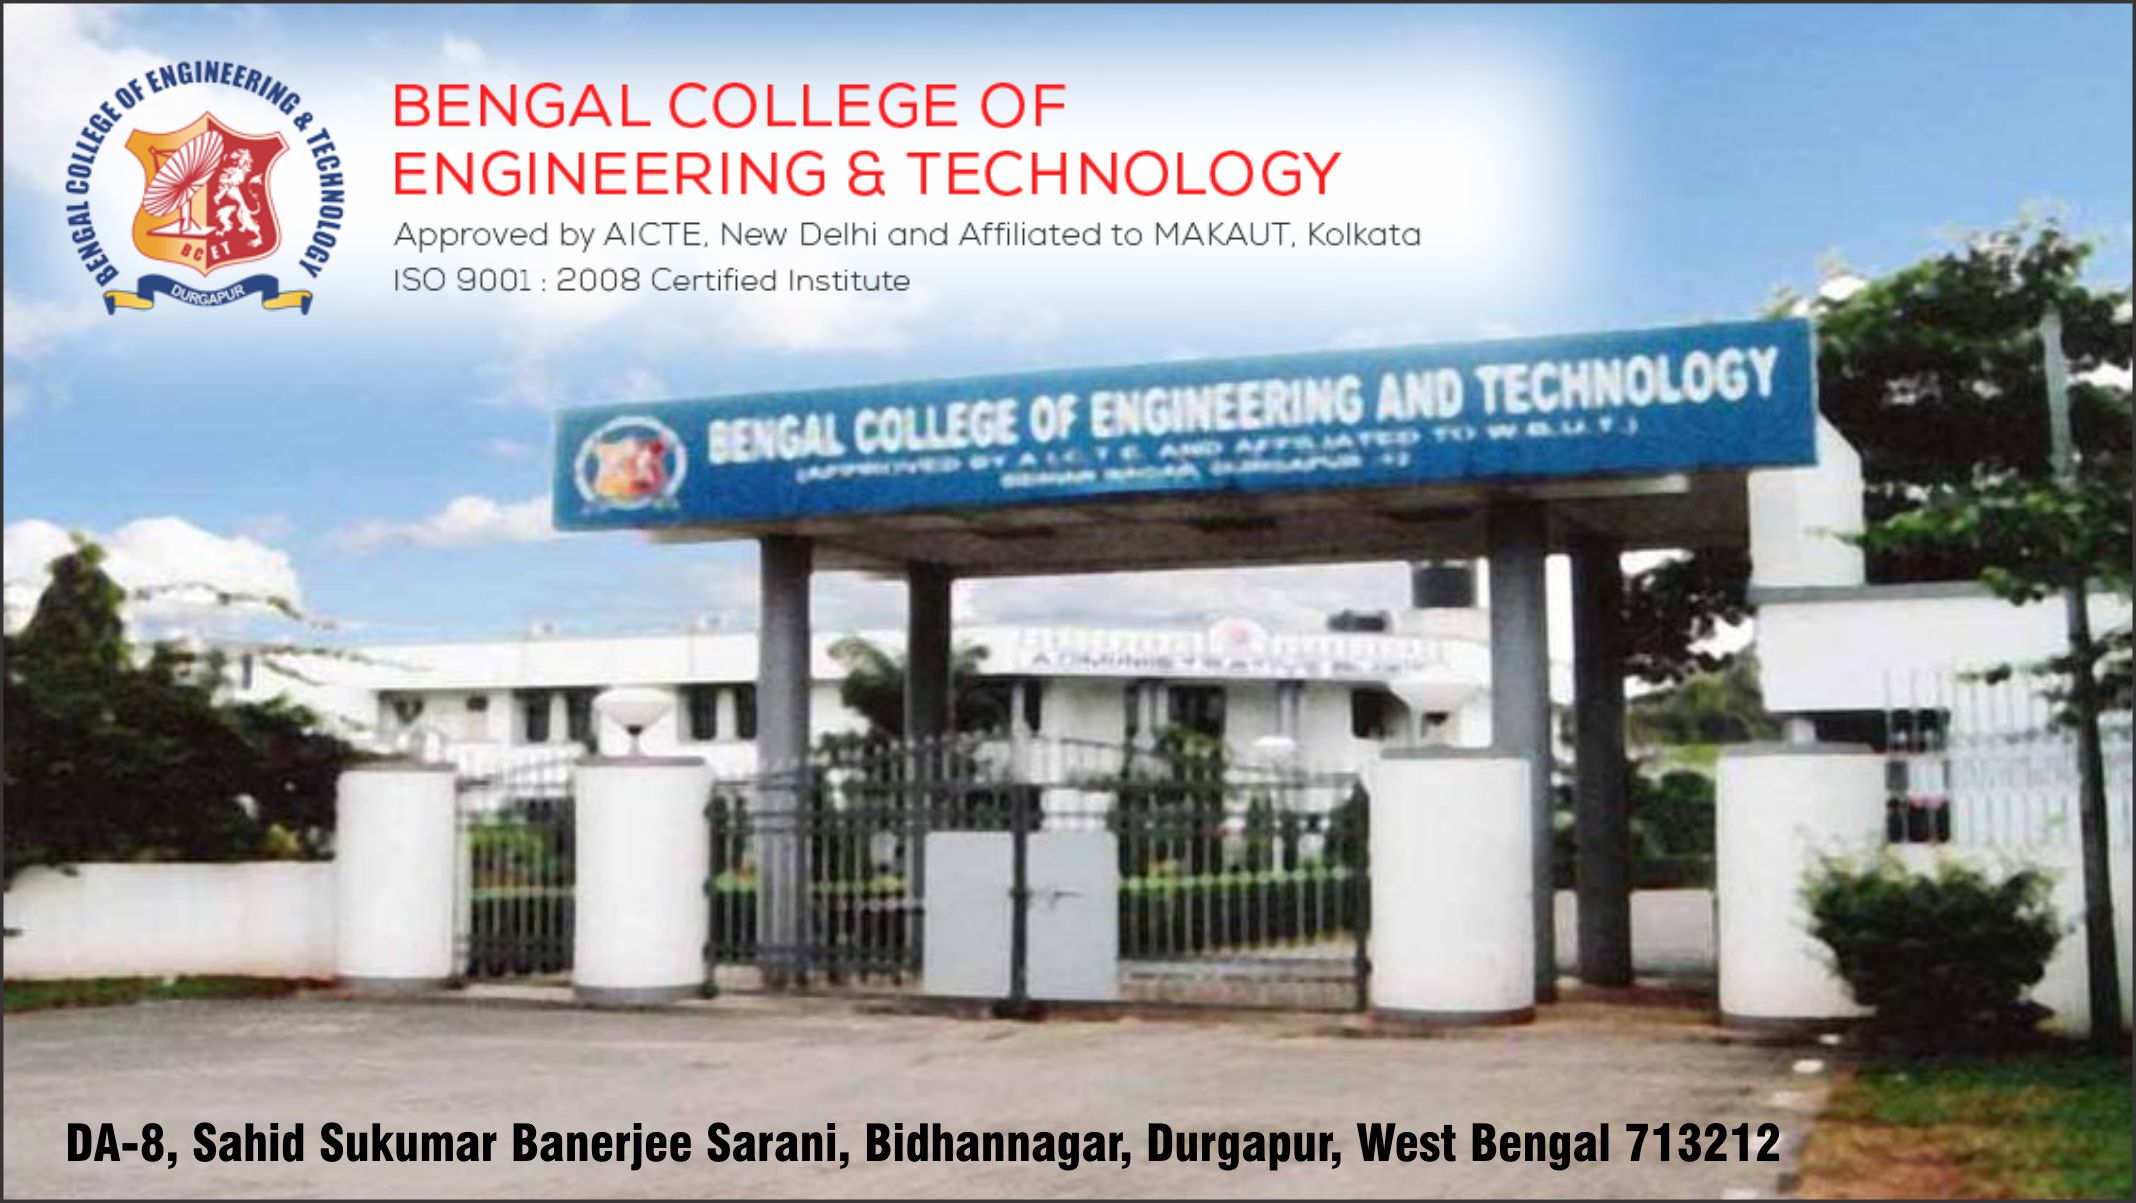 Out Side View of Bengal College of Engineering and Technology - BCET